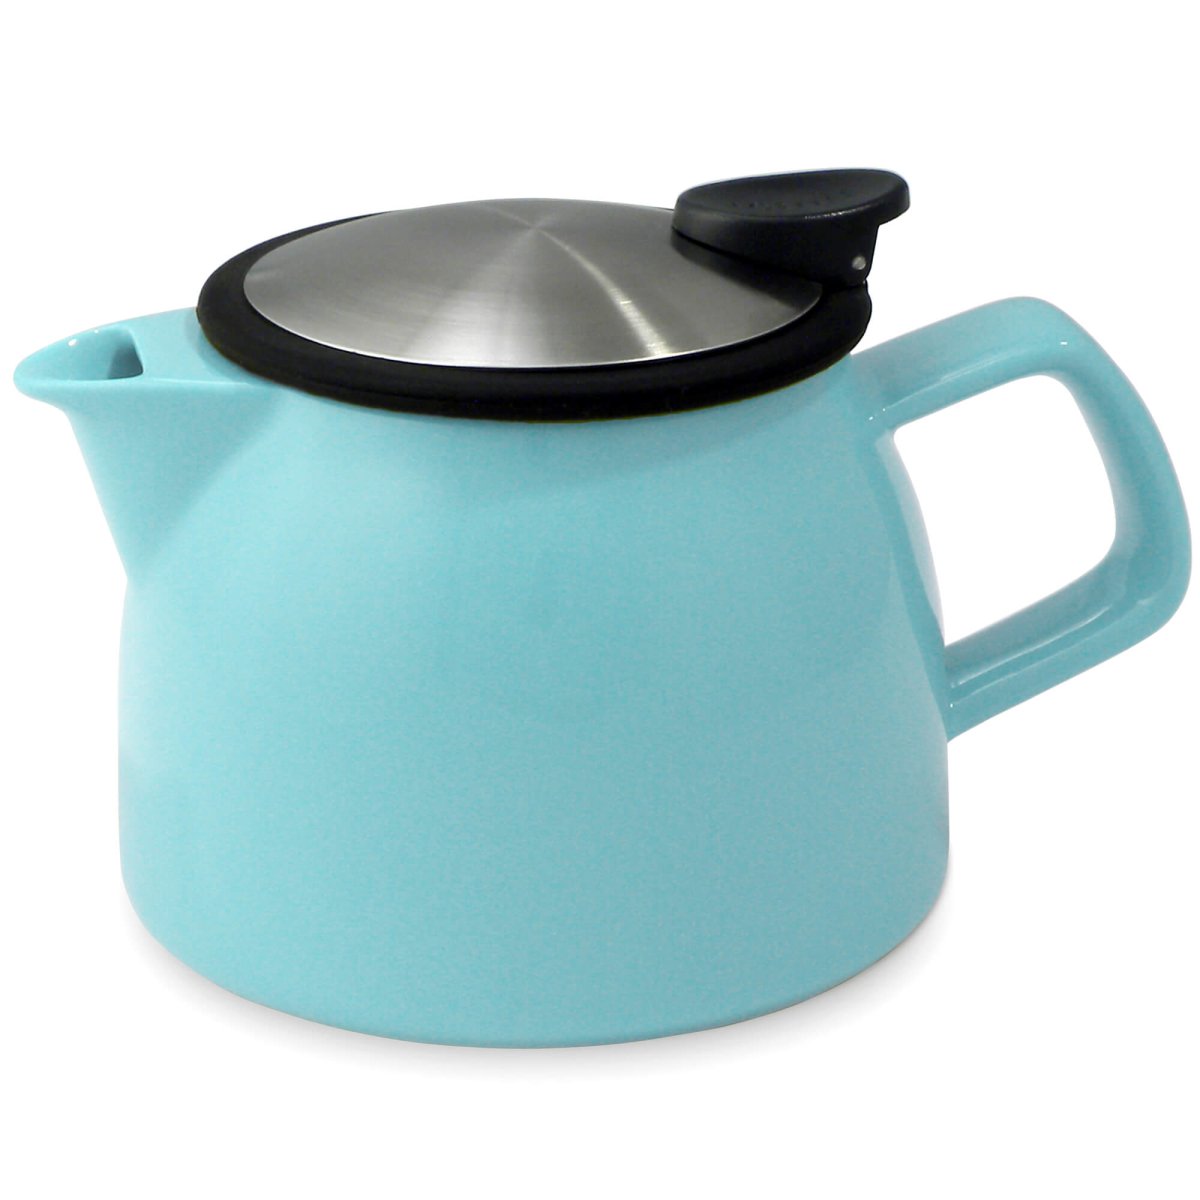 16 Ounce Bell Ceramic Teapot from FORLIFE (various colors)